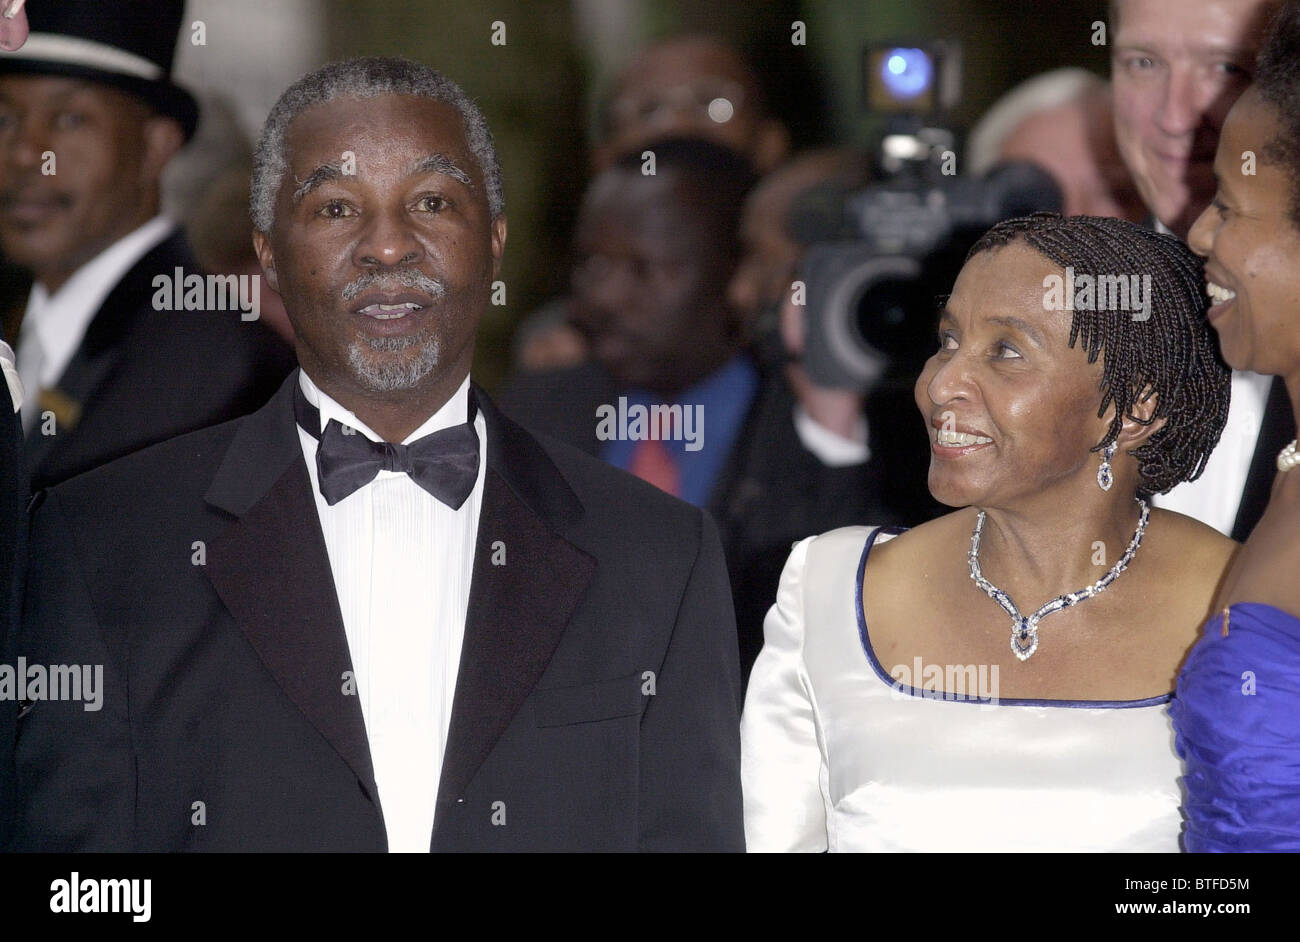 THABO MBEKI PRESIDENT OF SOUTH AFRICA AND HIS WIFE MRS MBEKI AT BANQUET IN LONDON Stock Photo